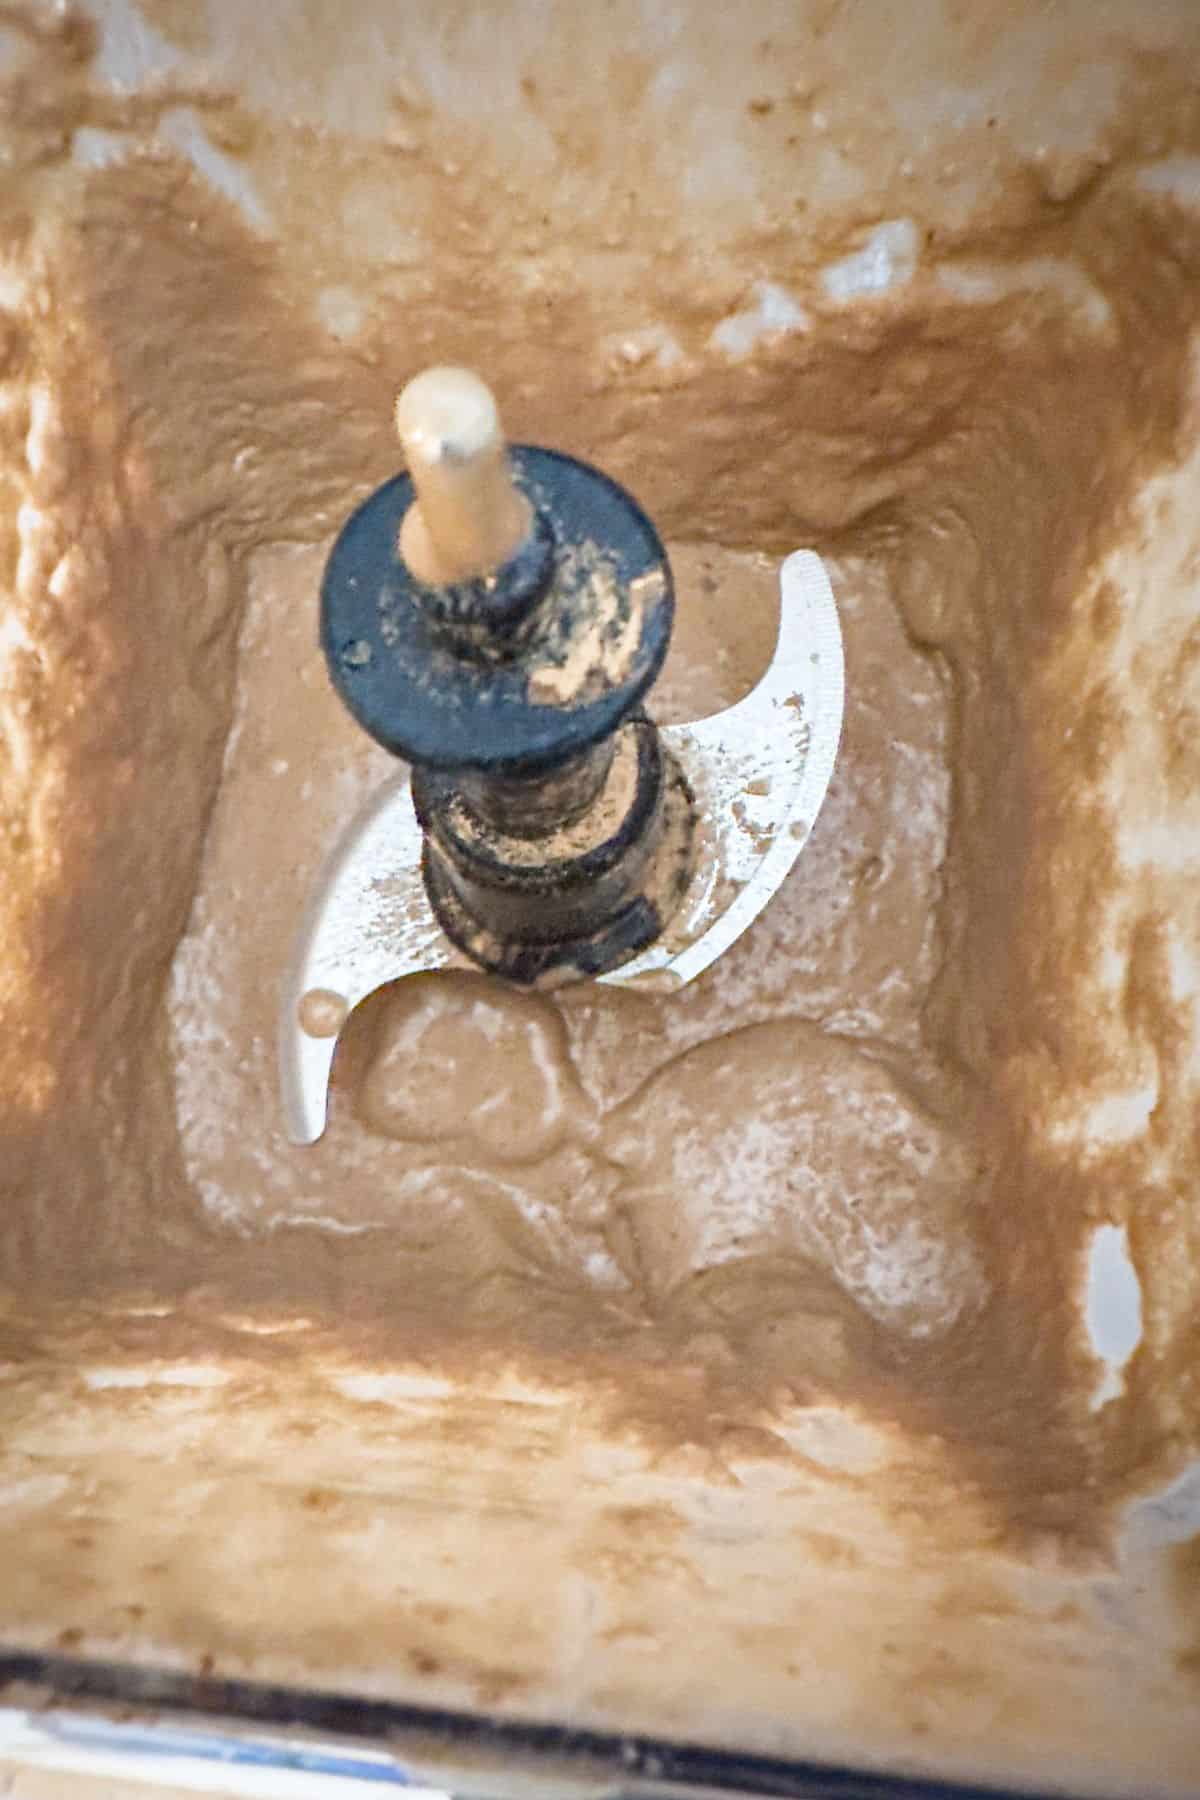 Overhead view of a high-speed blender filled with ingredients for a Peanut Butter Cup smoothie, including ice, showcasing the blending process for a creamy result.